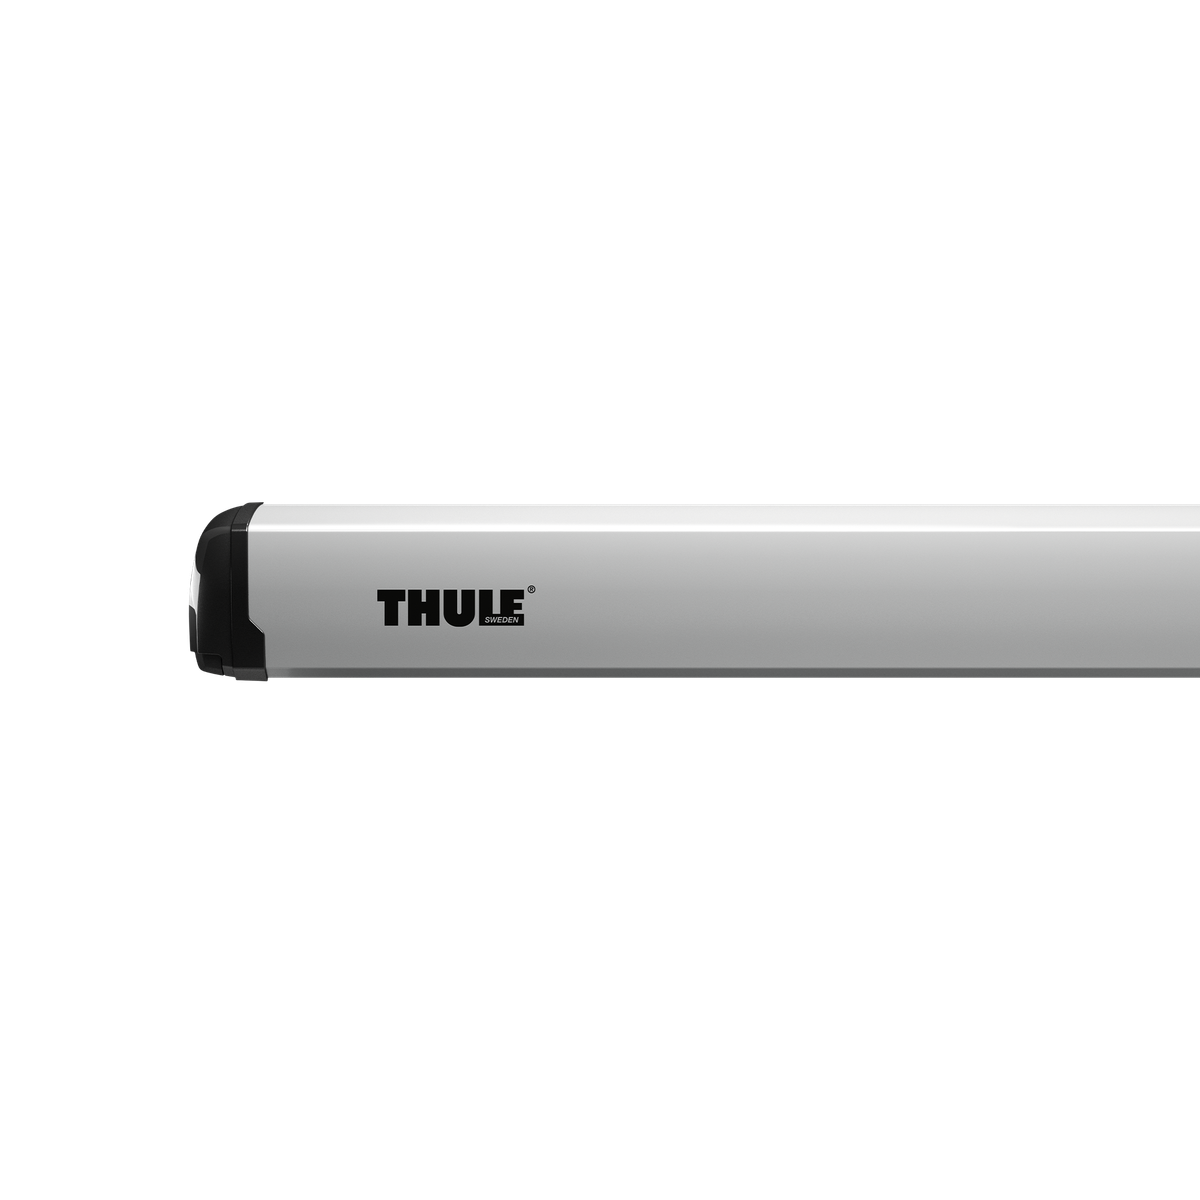 Thule 3200 roll-up box awning 3.00m anodised gray